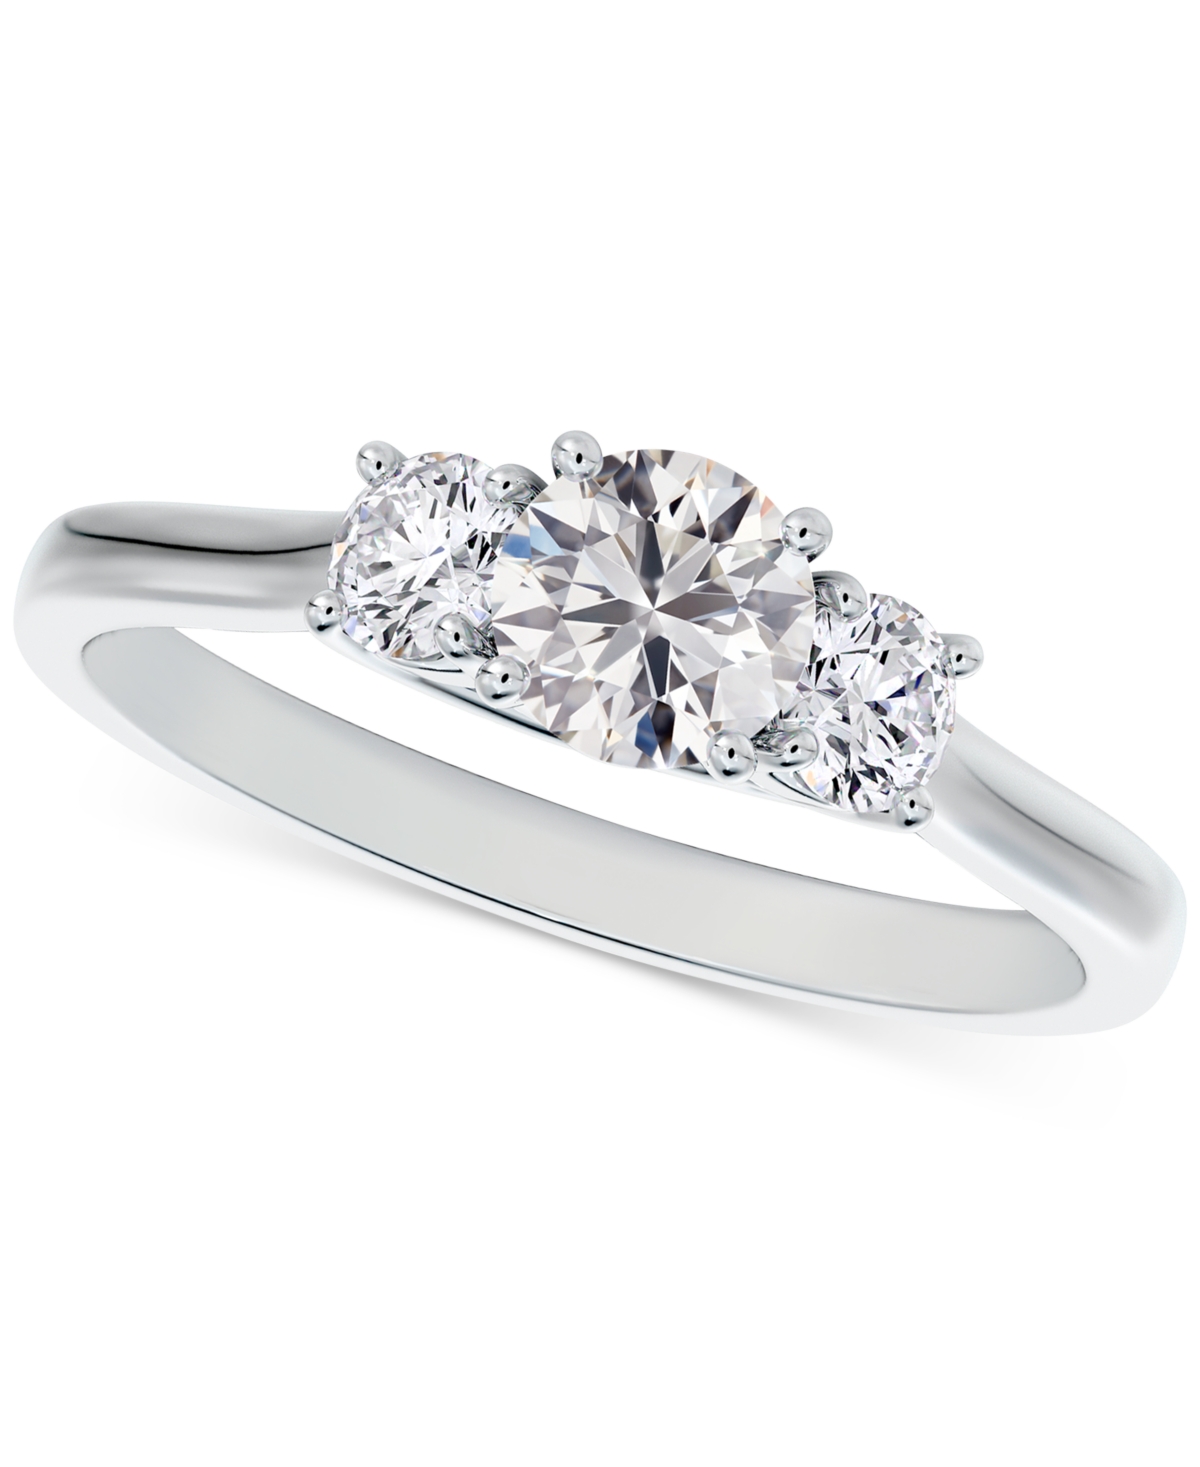 De Beers Forevermark Portfolio by De Beers Forevermark Diamond Three Stone Diamond Engagement Ring (3/4 ct. t.w.) in 14k White or Yellow Gold